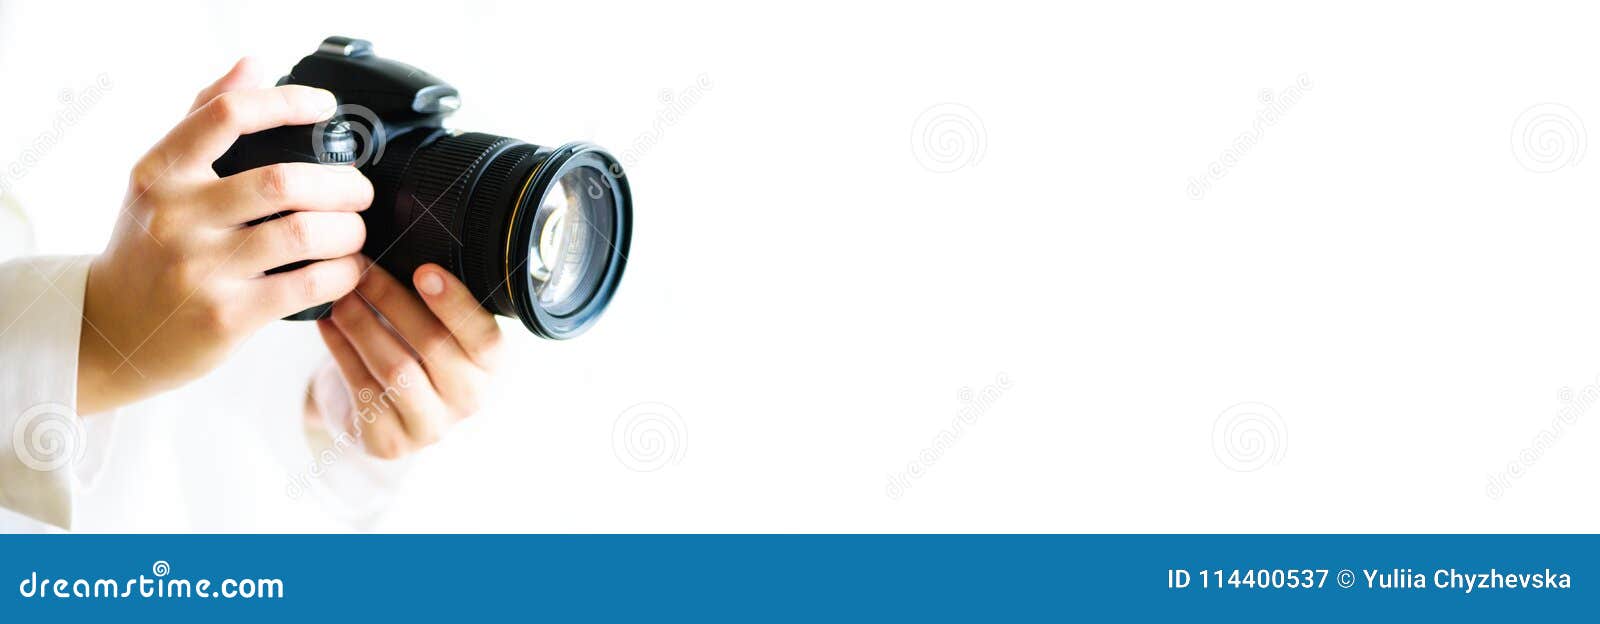 girl hands holding photo camera, white background, copy space. travel and shoot concept. banner